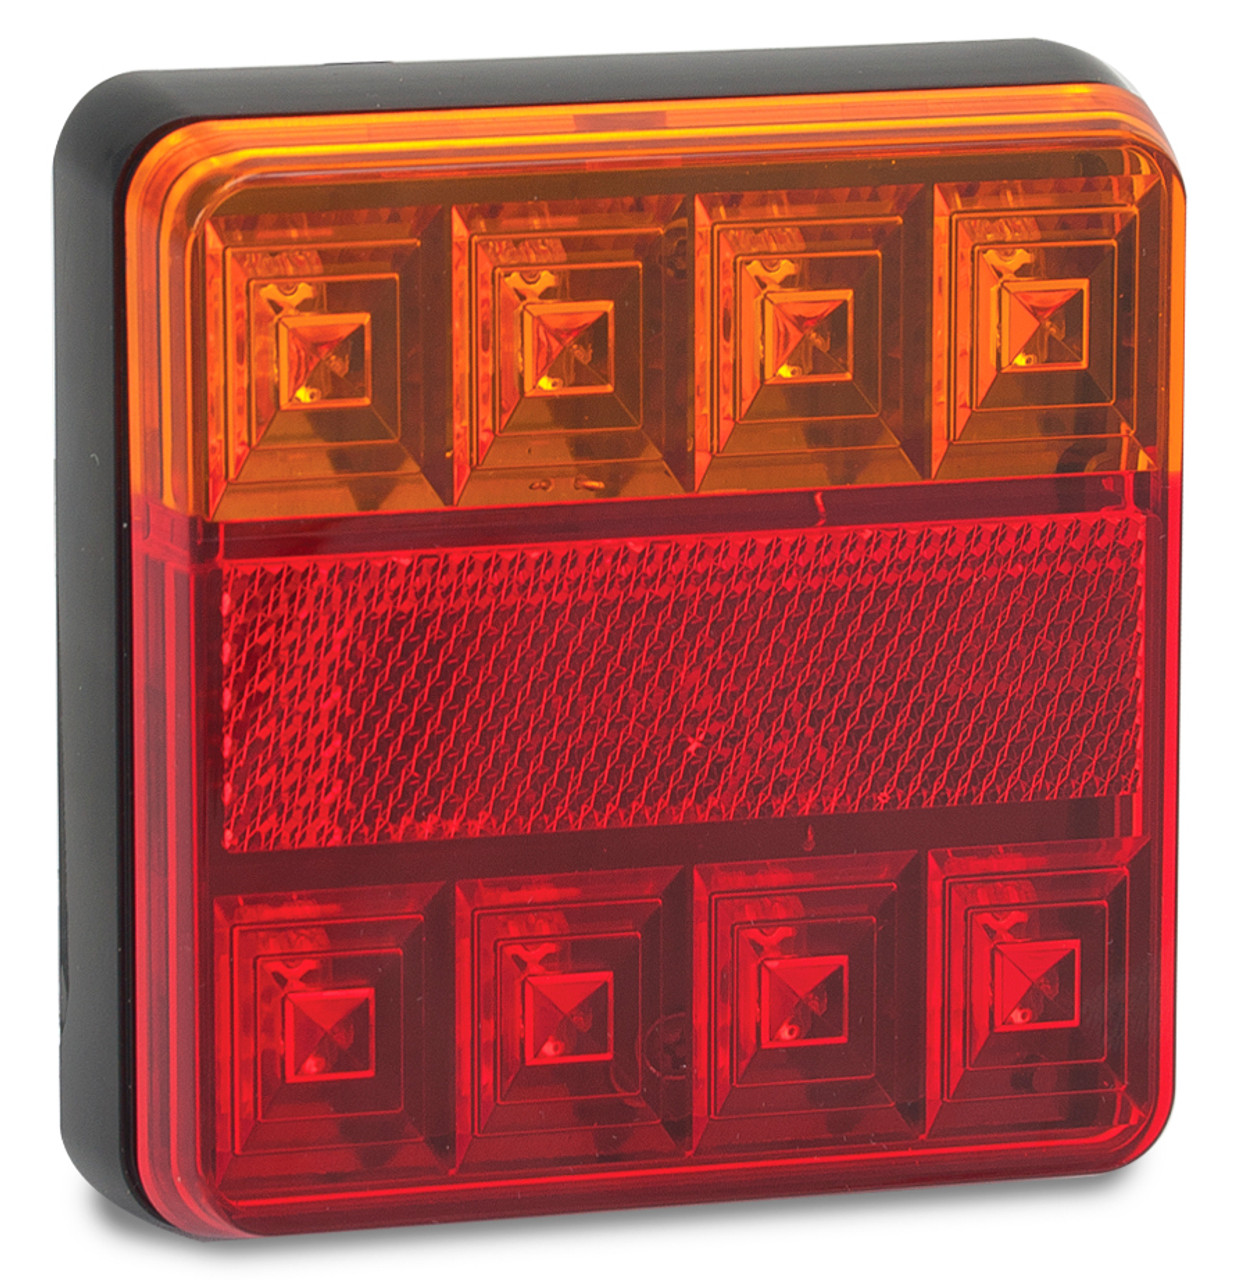 101BAR - Combination Tail Light. Small Trailer Rear Light. Stop, Tail, Indicator, Reflector Light 12v Blister Single Pack. LED Auto Lamps.  Ultimate LED.